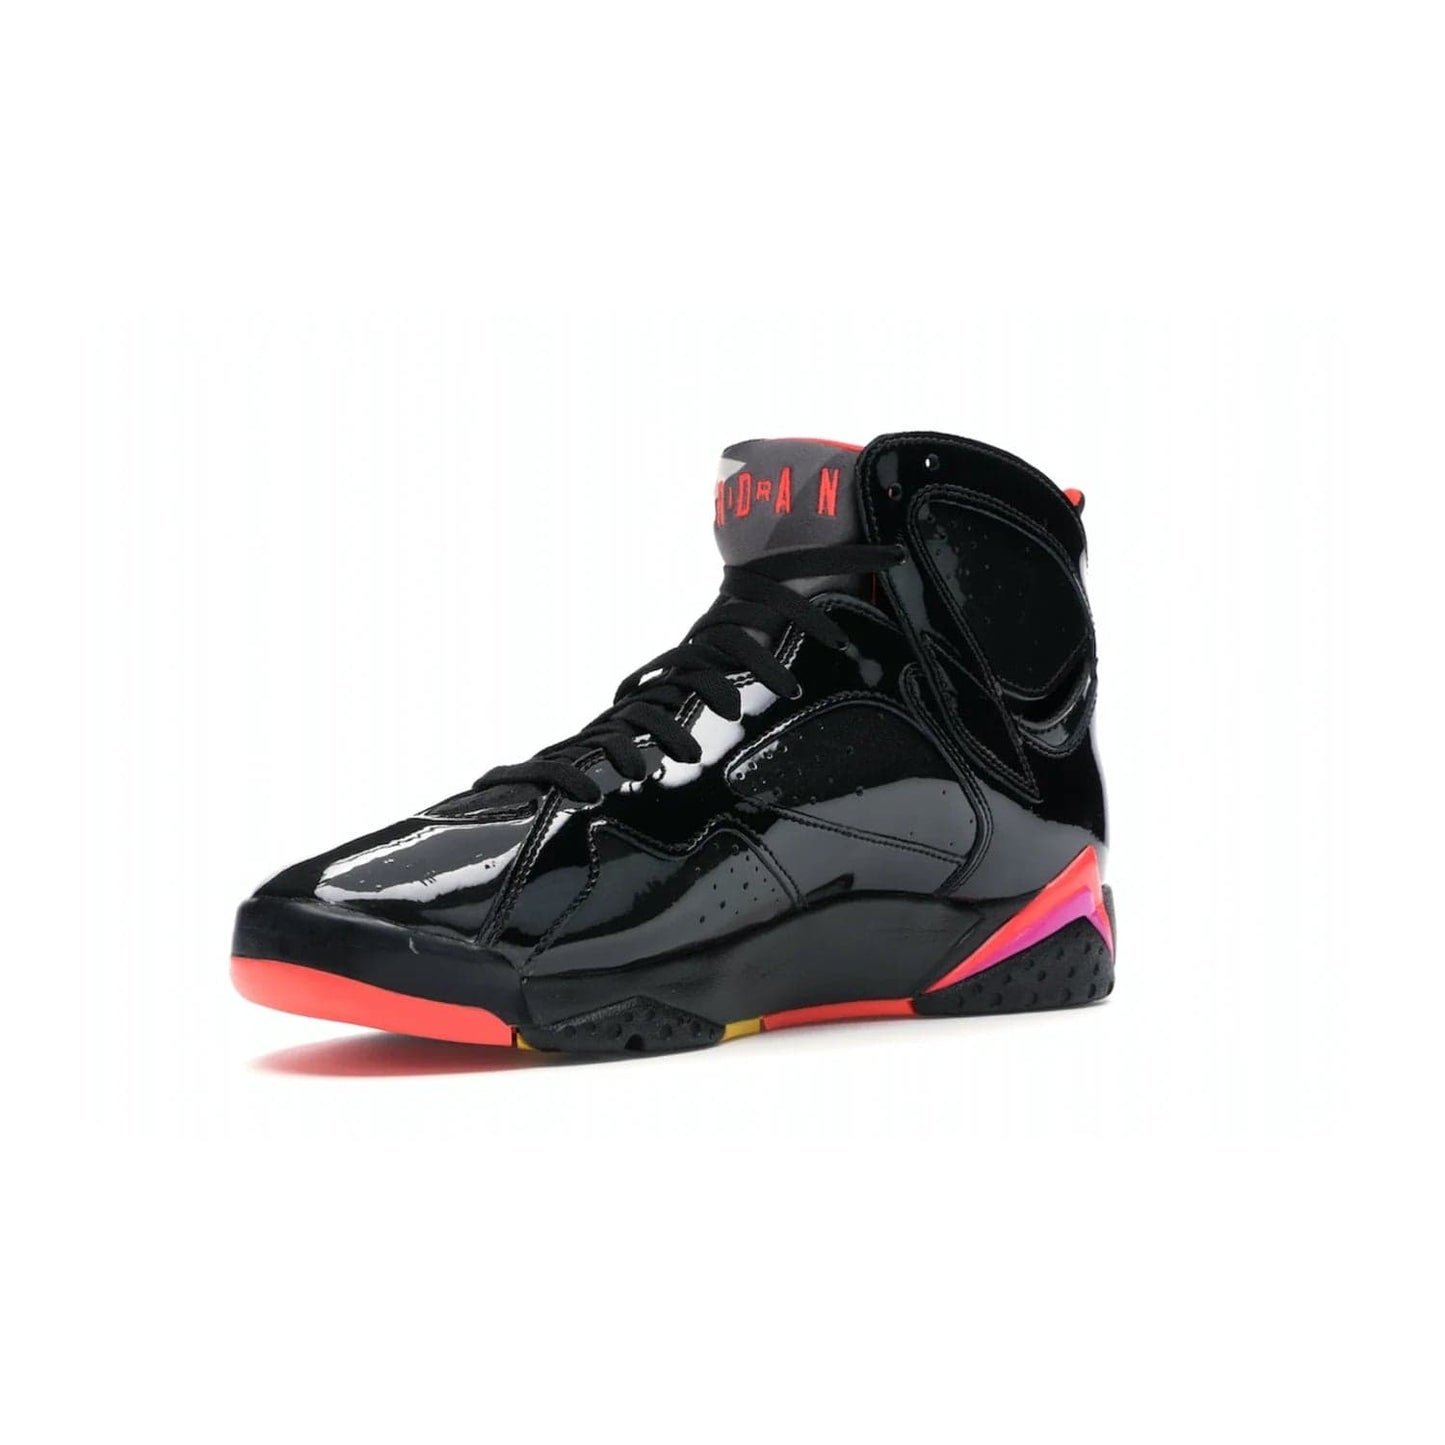 Jordan 7 Retro Black Patent (Women's) - Image 15 - Only at www.BallersClubKickz.com - #
Classic colorway! Shop the new Jordan 7 Retro Black Patent. Featuring a sleek combination of leather and patent leather upper, these shoes offer a bold yet luxurious look. Perfectly complete with a bright red Jumpman logo. Self-lacing Smart laces and Air-Sole cushion unit provide comfort and convenience.